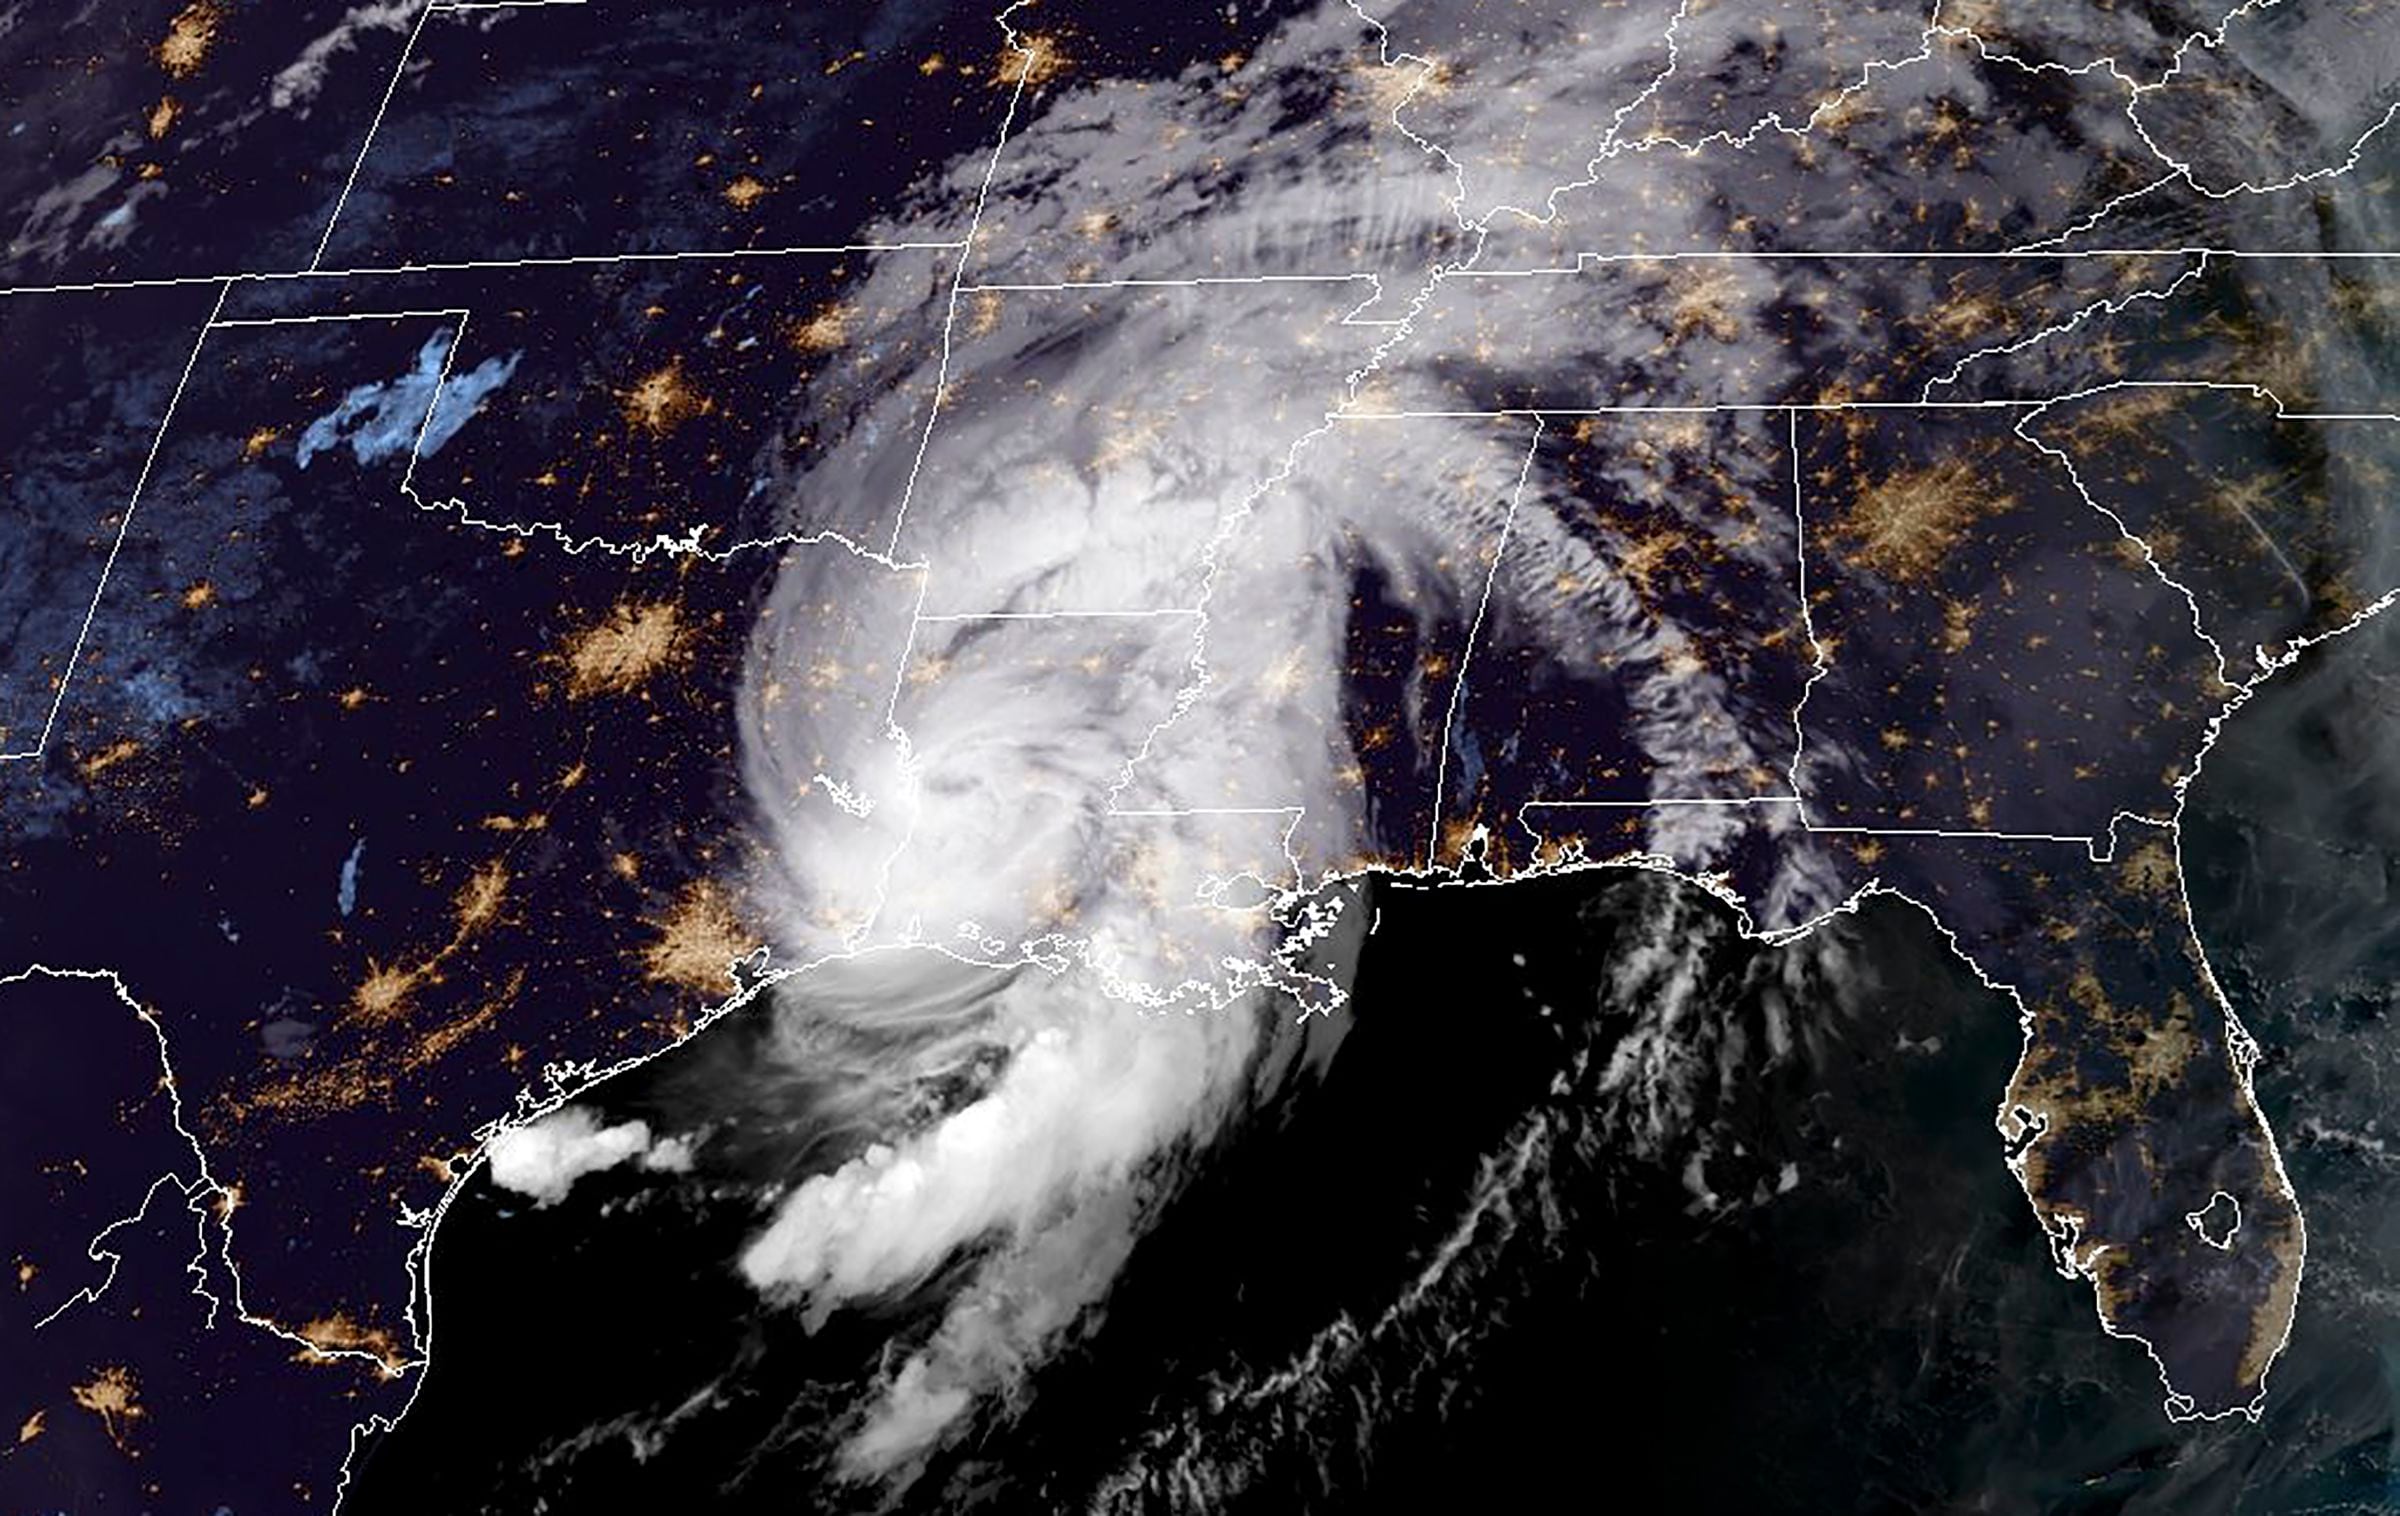 This NOAA/GOES satellite image shows Hurricane Laura over the US state of Louisiana, near the line of US state Texas at 11:50 UTC, on August 27, 2020. - Hurricane Laura slammed into the southern US state of Louisiana Thursday and the monster category 4 storm prompted warnings of "unsurvivable" ocean surges and evacuation orders for hundreds of thousands of Gulf Coast residents. The National Hurricane Center (NHC) said "extremely dangerous" Laura would bring winds of 150 miles per hour (240 kilometers per hour) and "destructive waves will cause catastrophic damage" to Louisiana and Texas. (Photo by Handout / NOAA/GOES / AFP) / RESTRICTED TO EDITORIAL USE - MANDATORY CREDIT "AFP PHOTO / NOAA/GOES" - NO MARKETING - NO ADVERTISING CAMPAIGNS - DISTRIBUTED AS A SERVICE TO CLIENTS